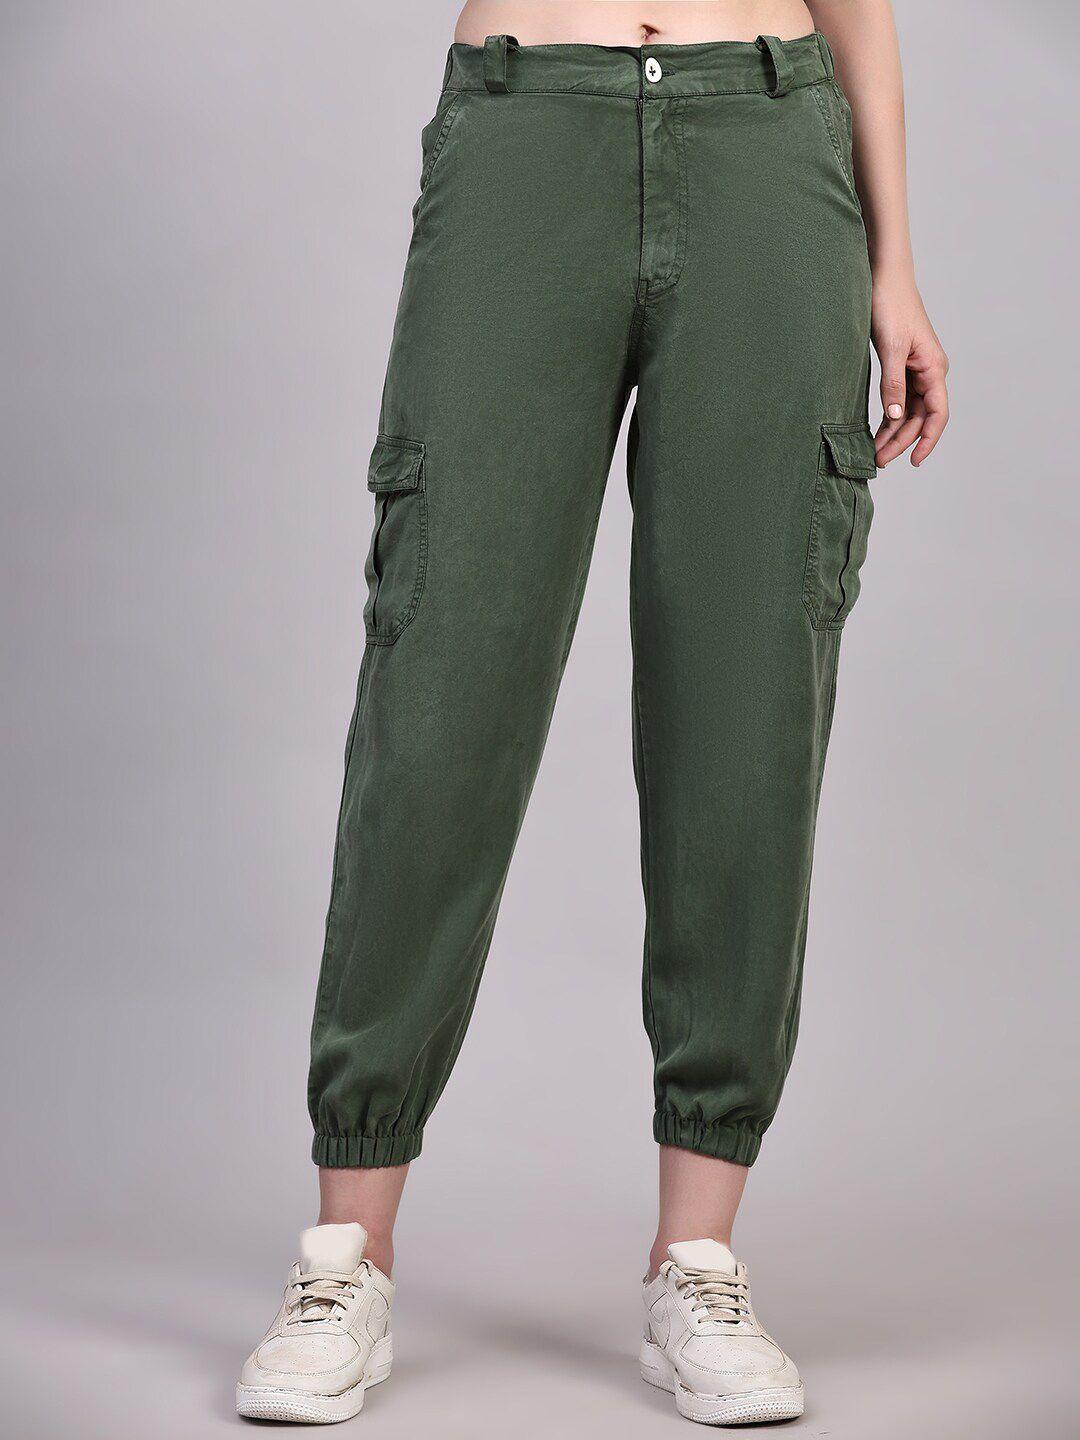 pomegal women relaxed fit joggers